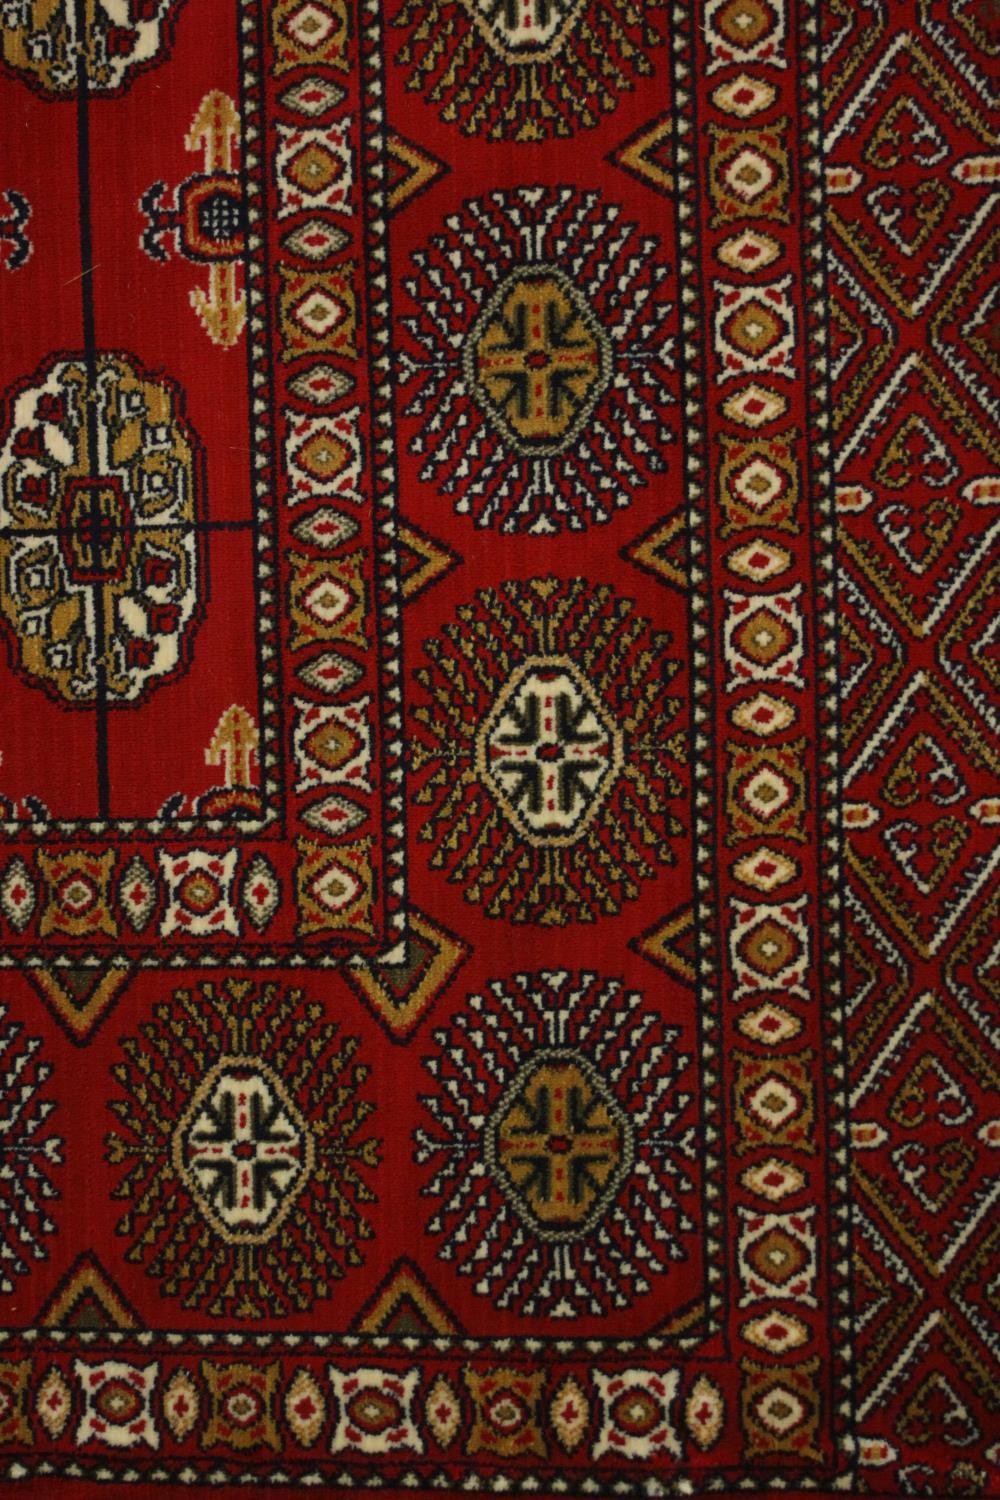 A Bokhara carpet with elephant's foot motifs on a burgundy ground within floral multiple borders. - Image 7 of 8